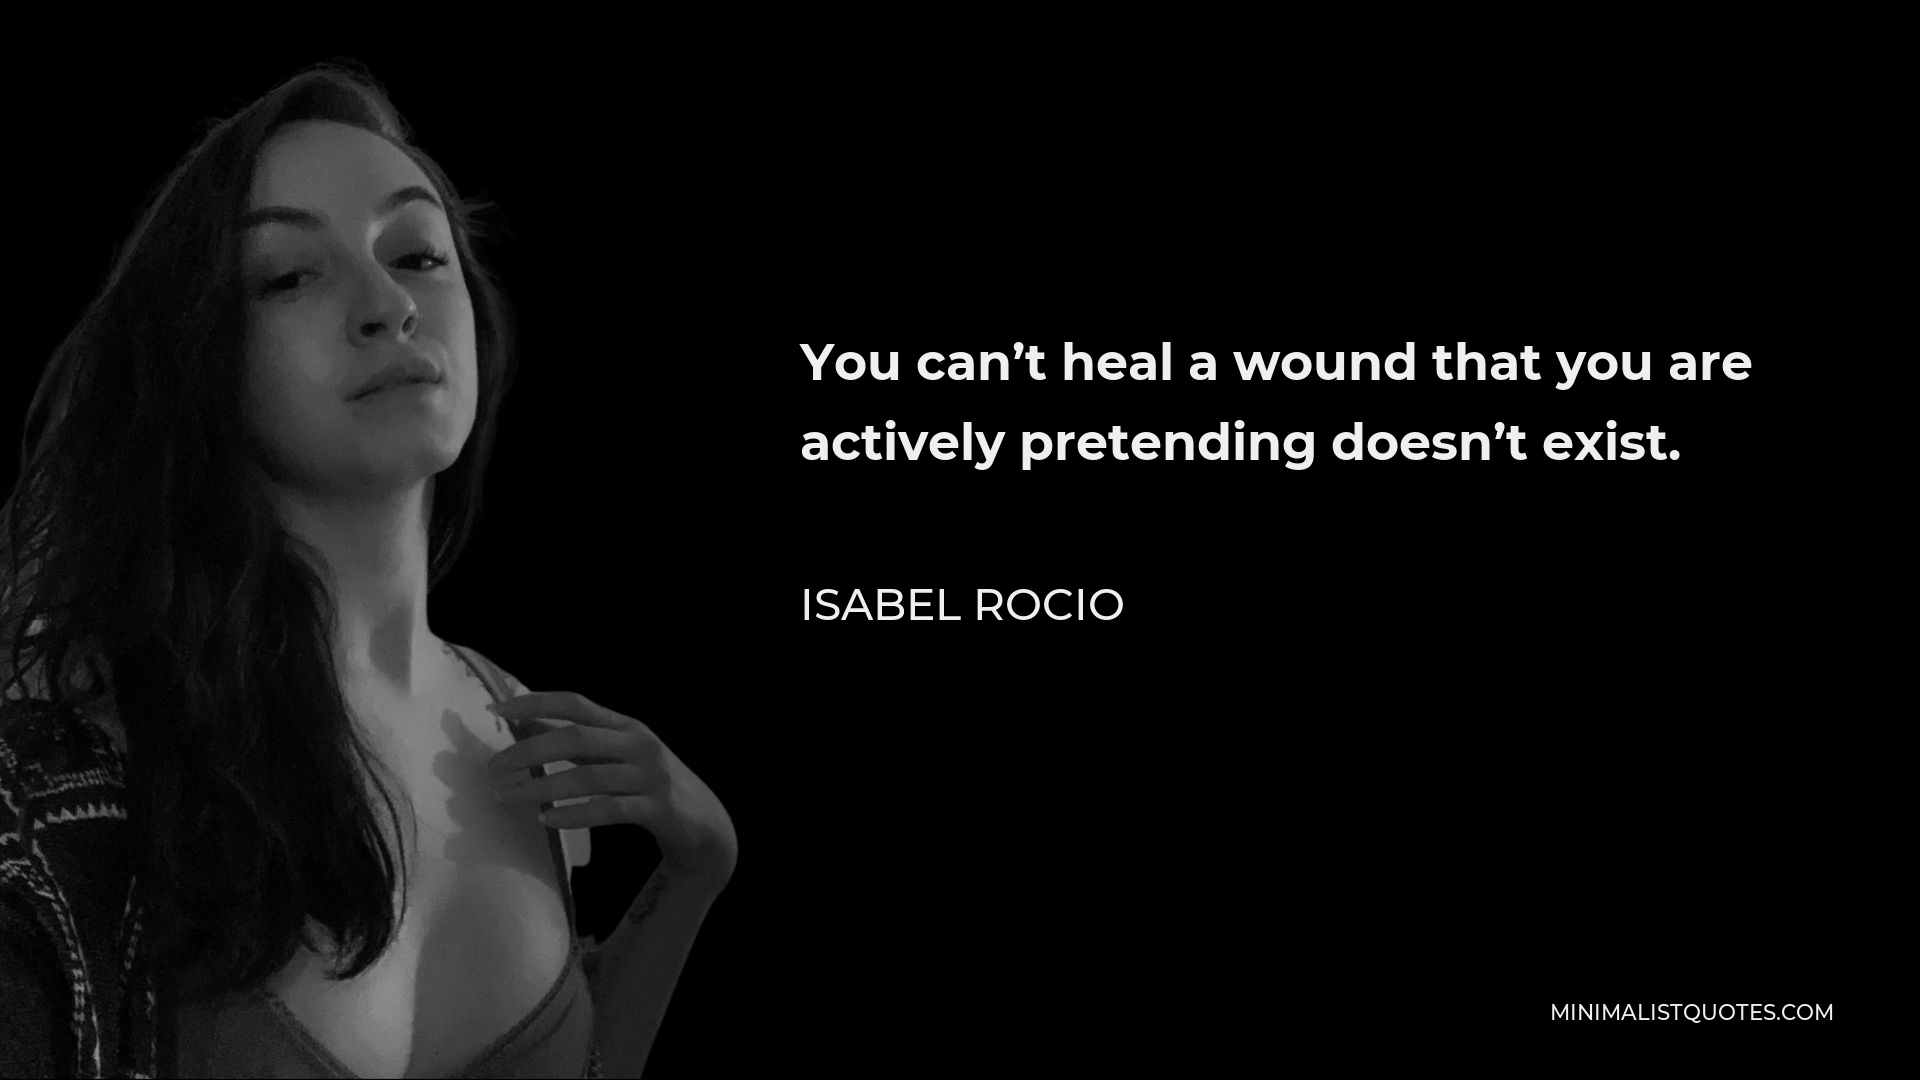 Isabel Rocio Quote - You can’t heal a wound that you are actively pretending doesn’t exist.